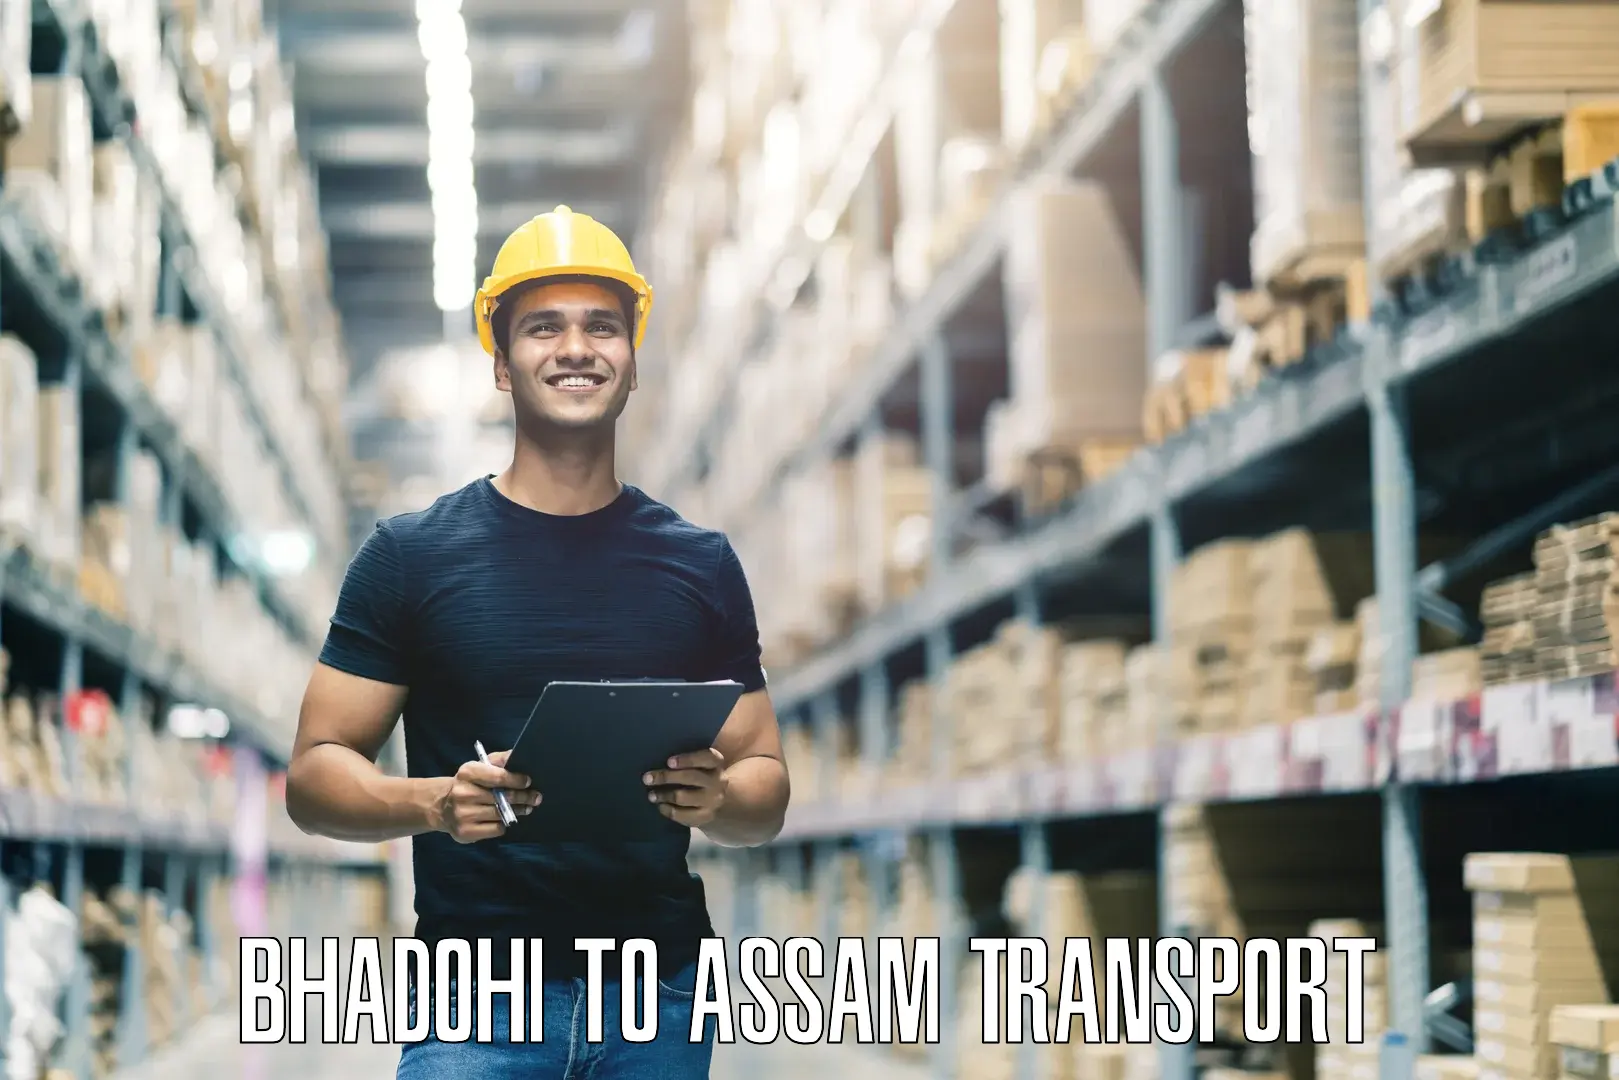 Delivery service Bhadohi to Assam